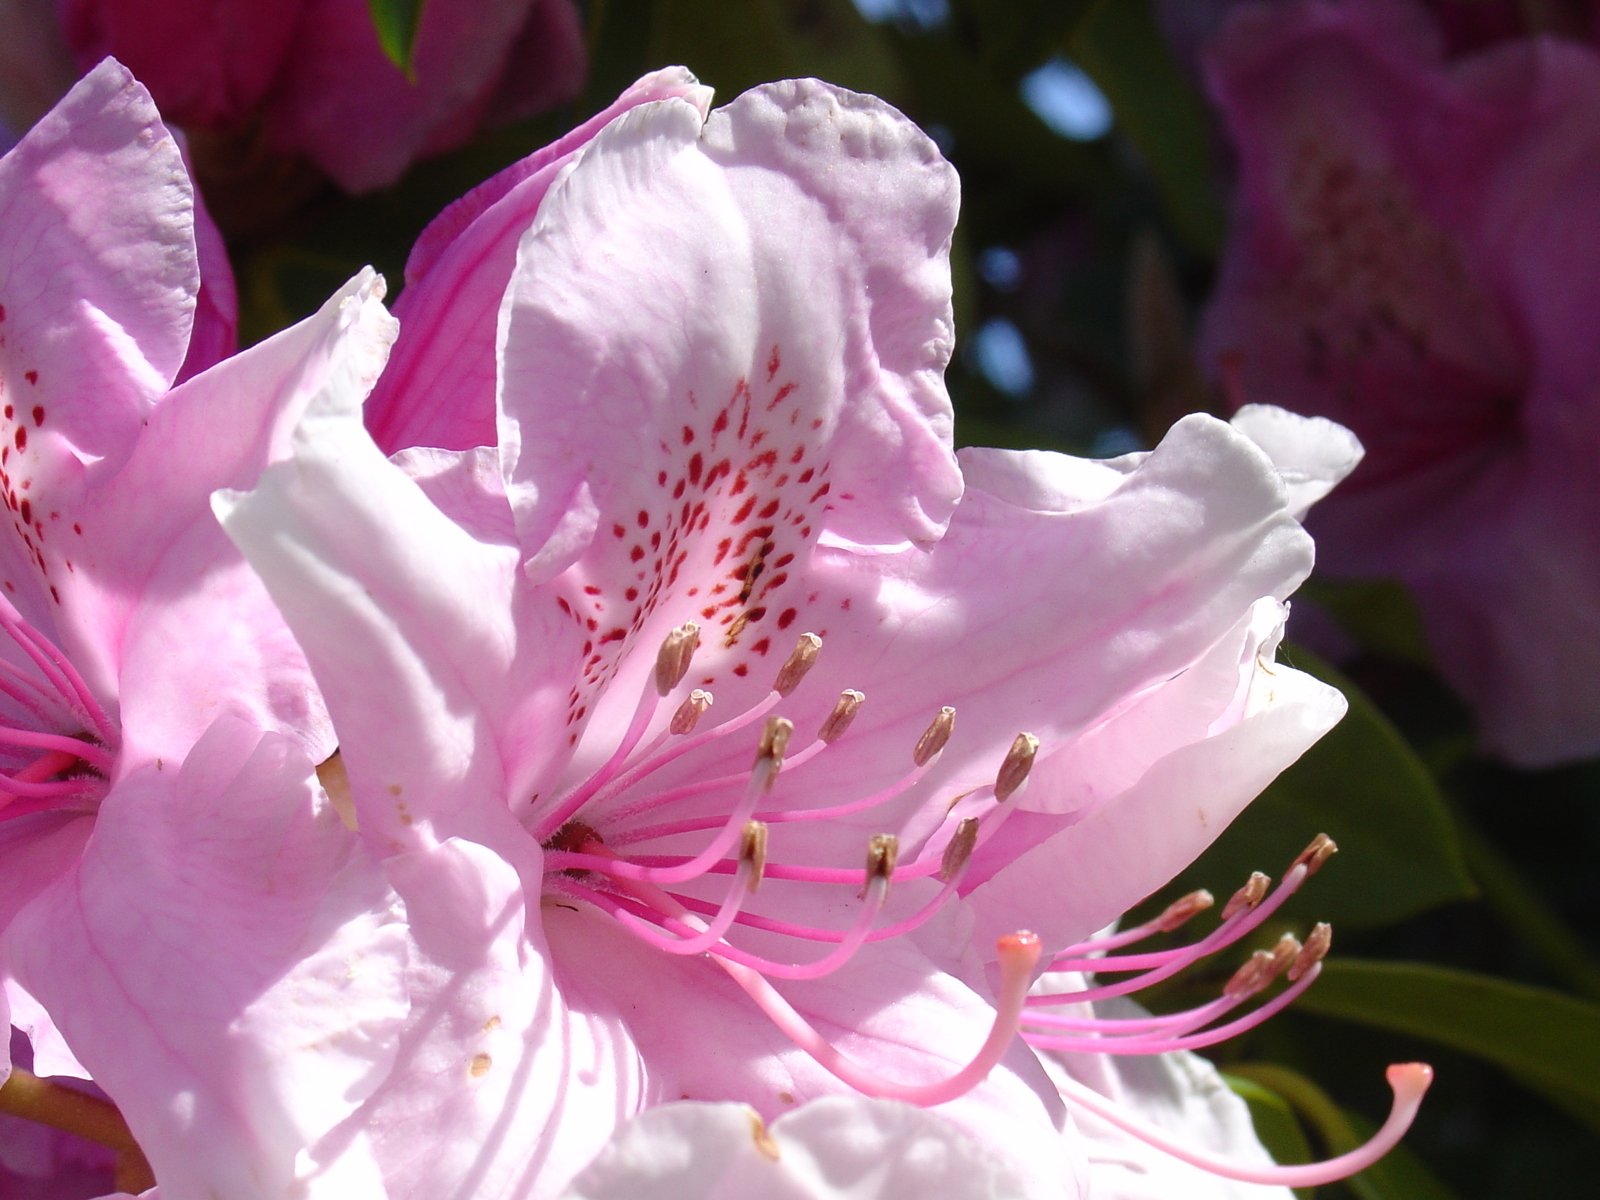 a close up view of some pink flowers